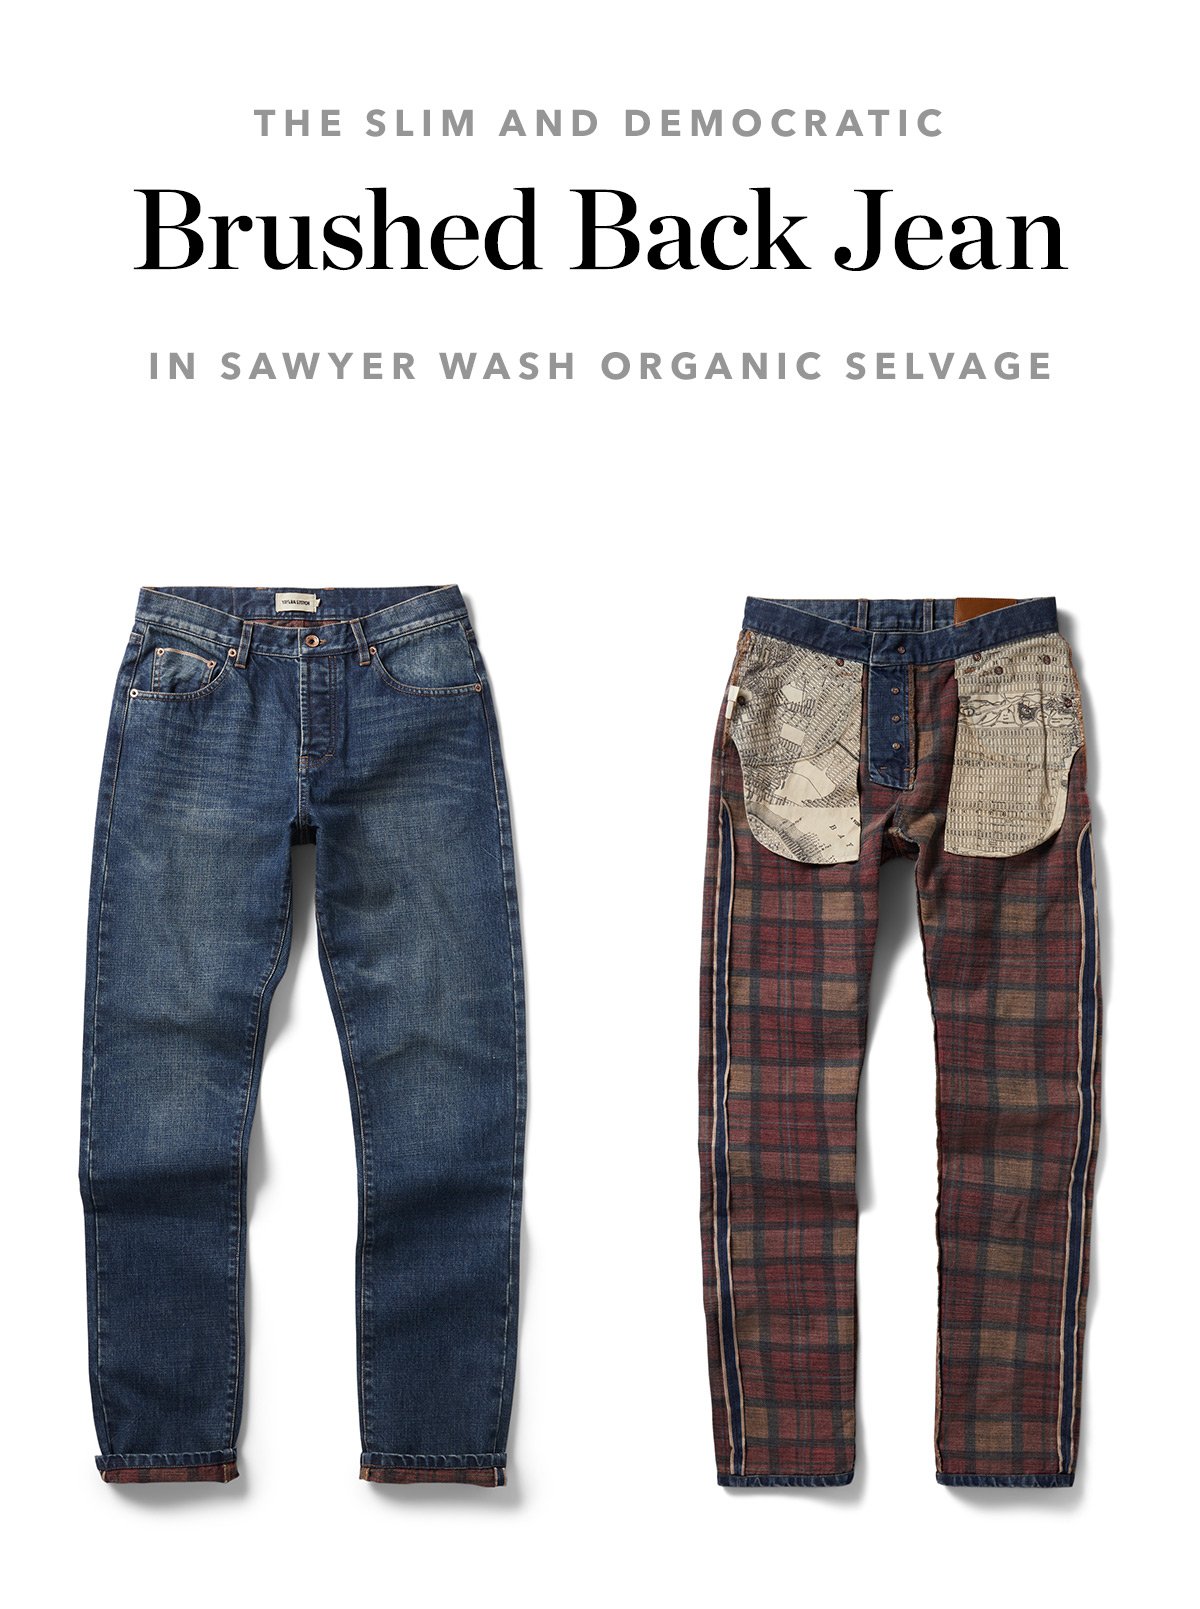 The Slim and Democratic Brushed Back Jean in Sawyer Wash Organic Selvage